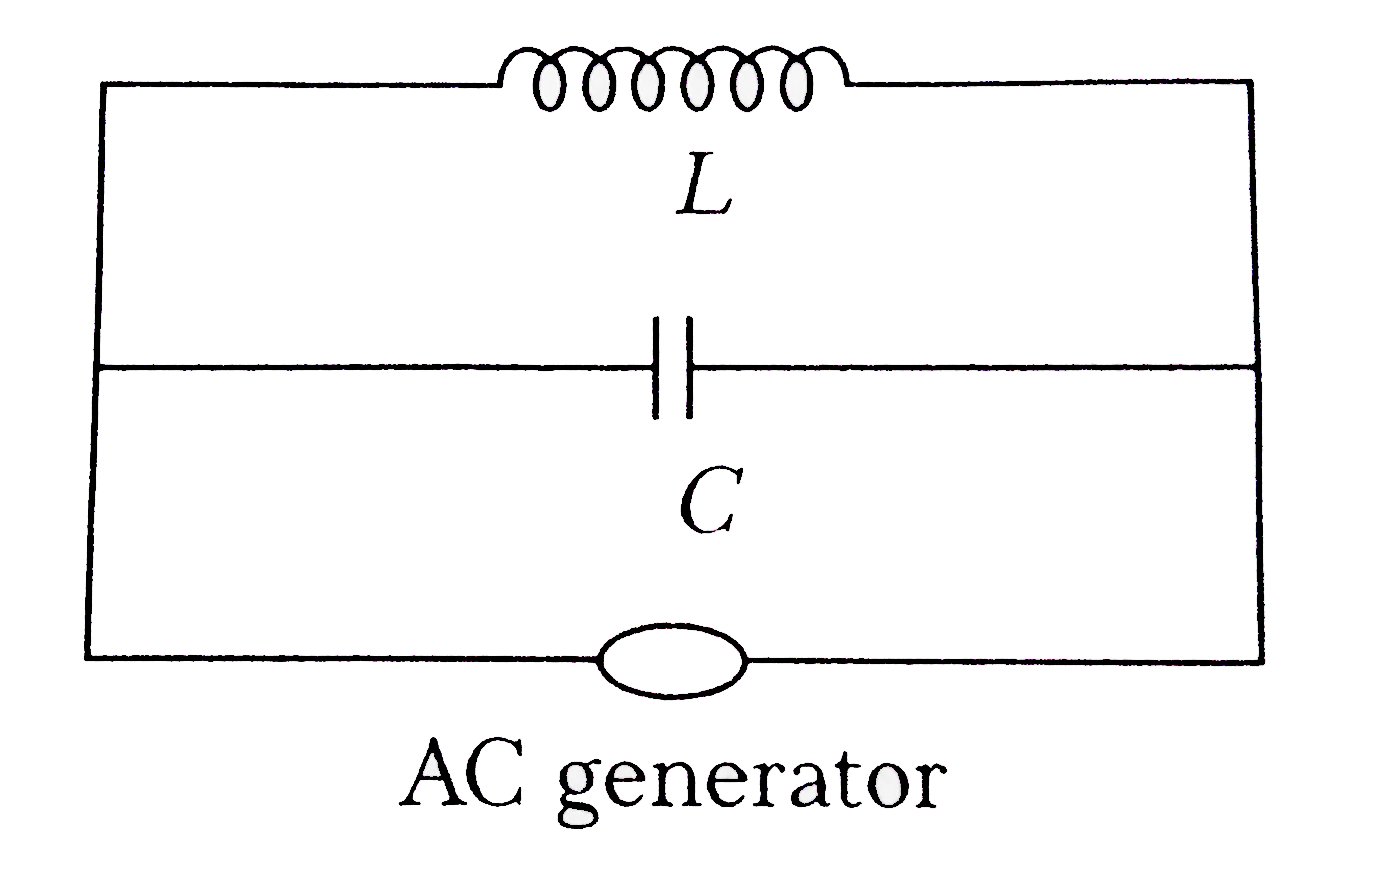 In the circuit shown in the figure , the alternating currents through inductor and capacitor are 1.2 and 1.0 A respectively . The current drawn from the generator is